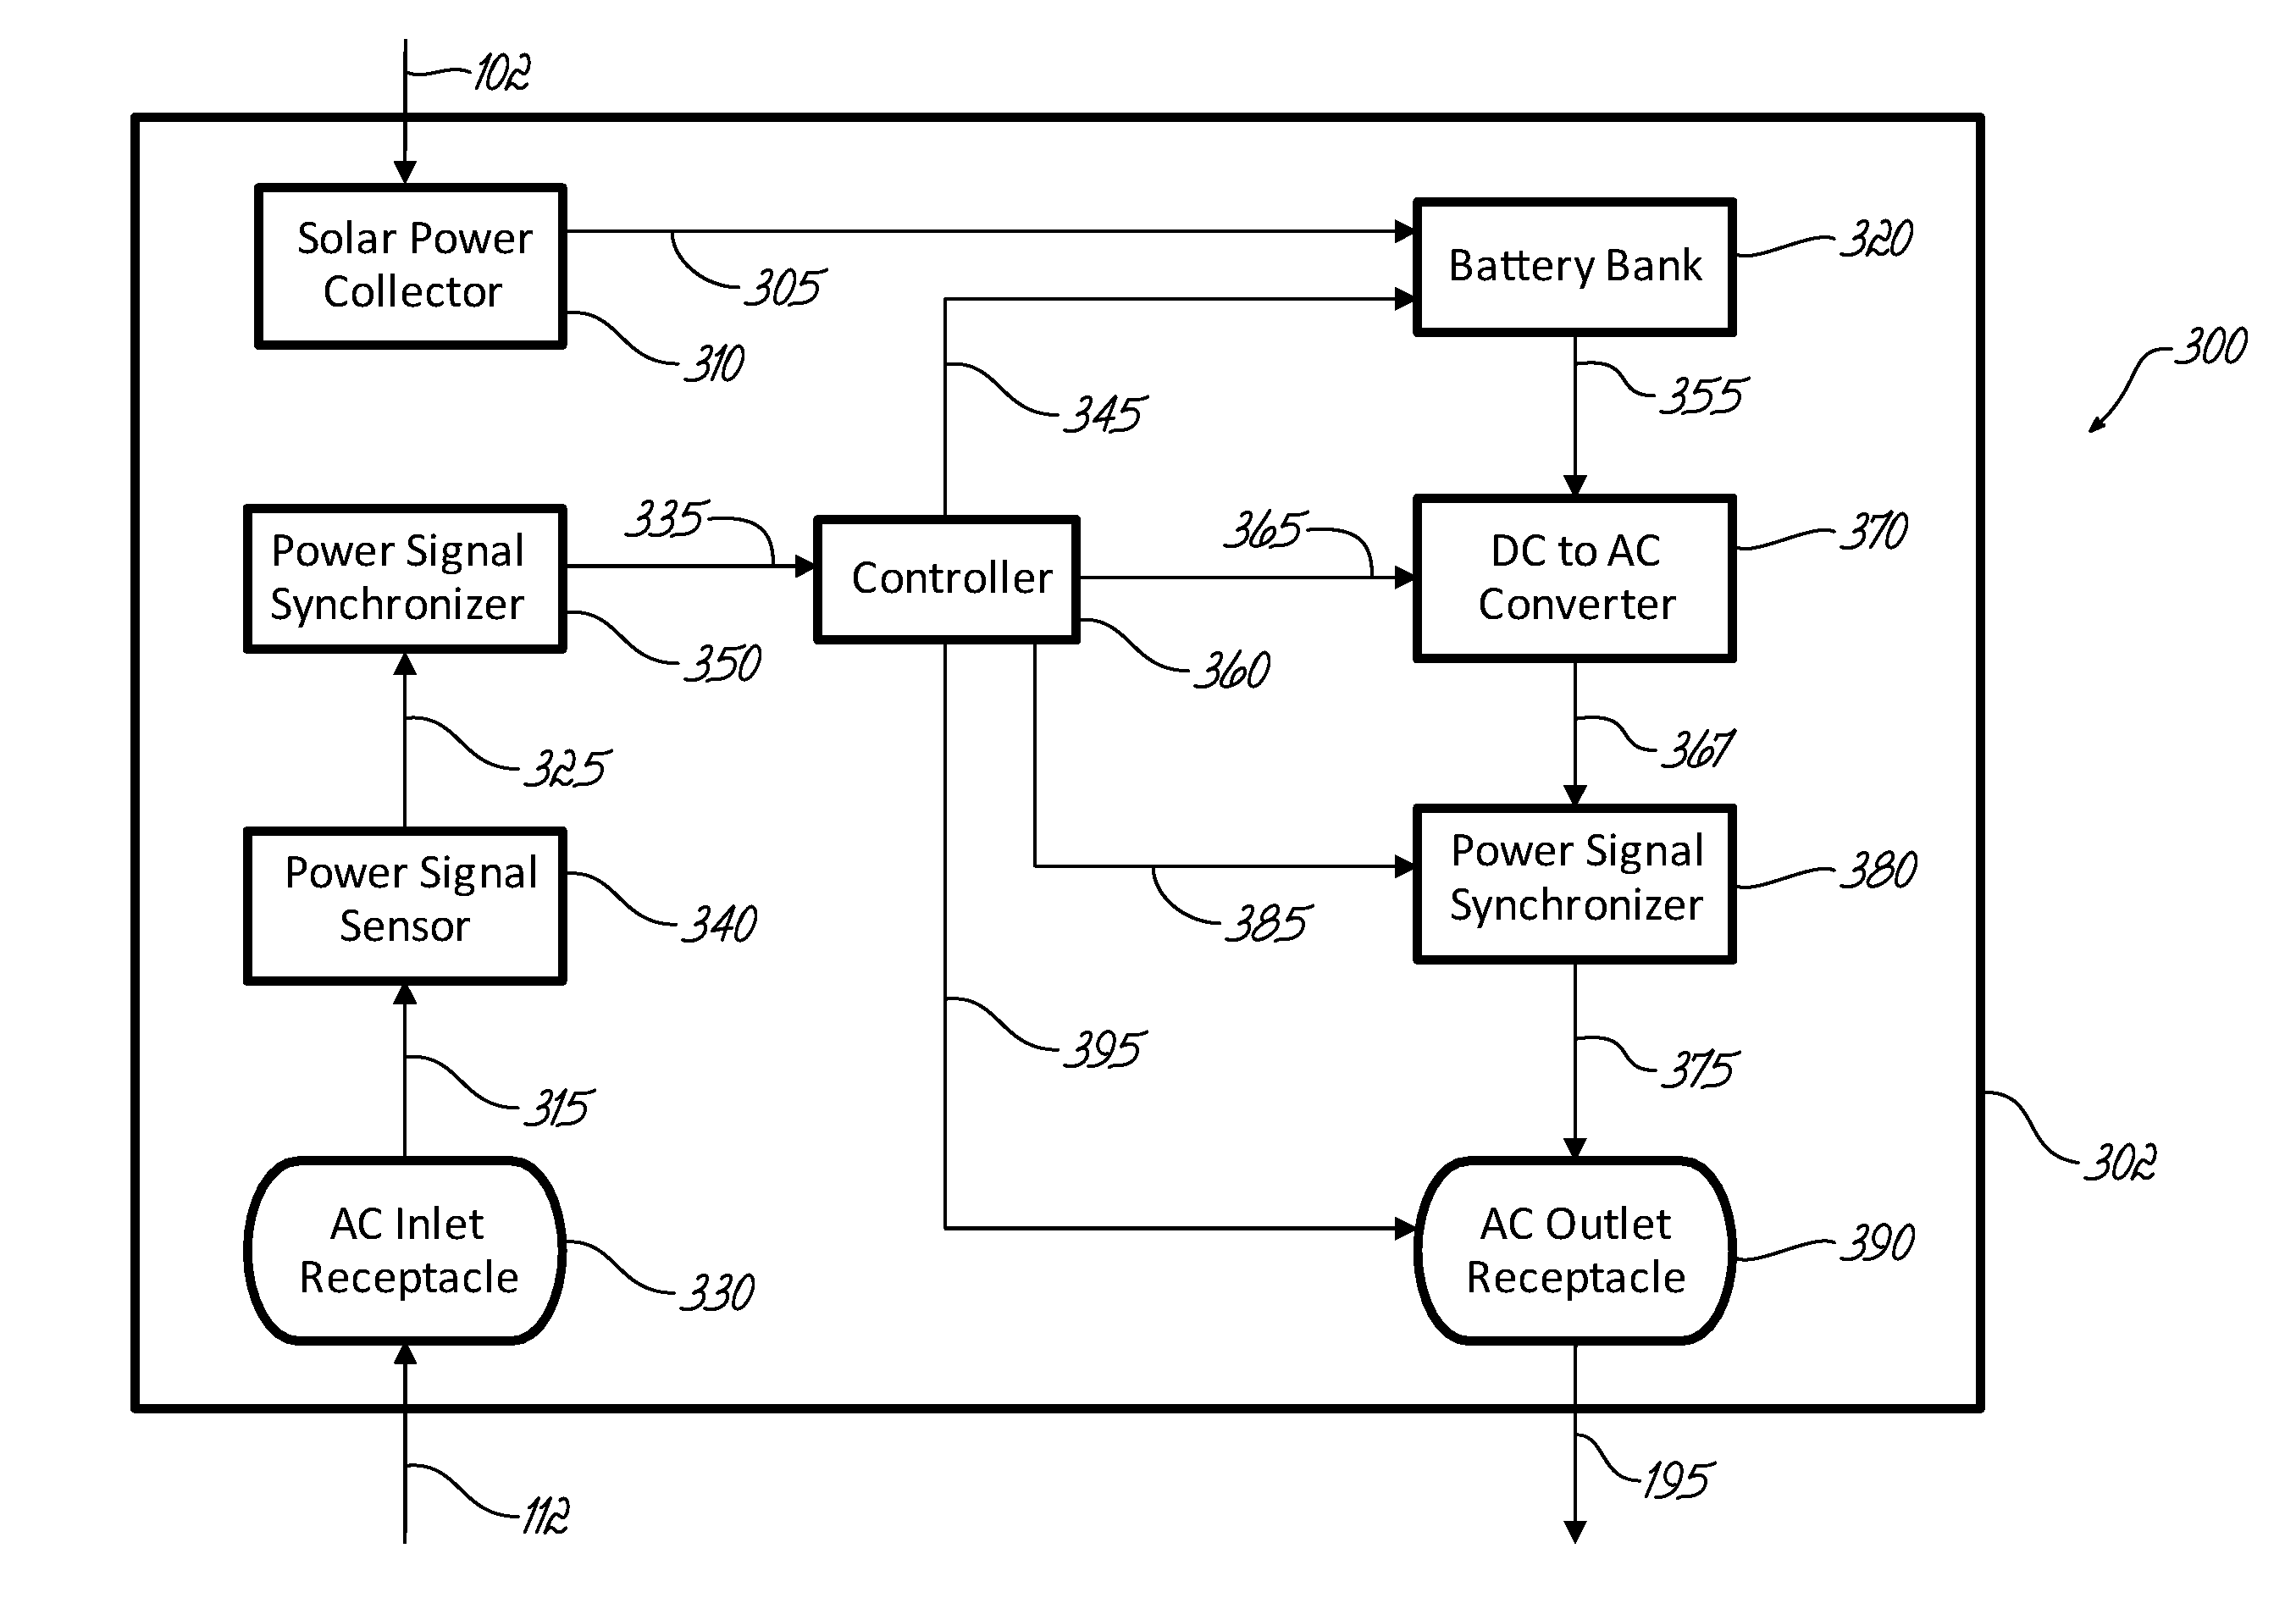 Solar Power Generation, Distribution, and Communication System